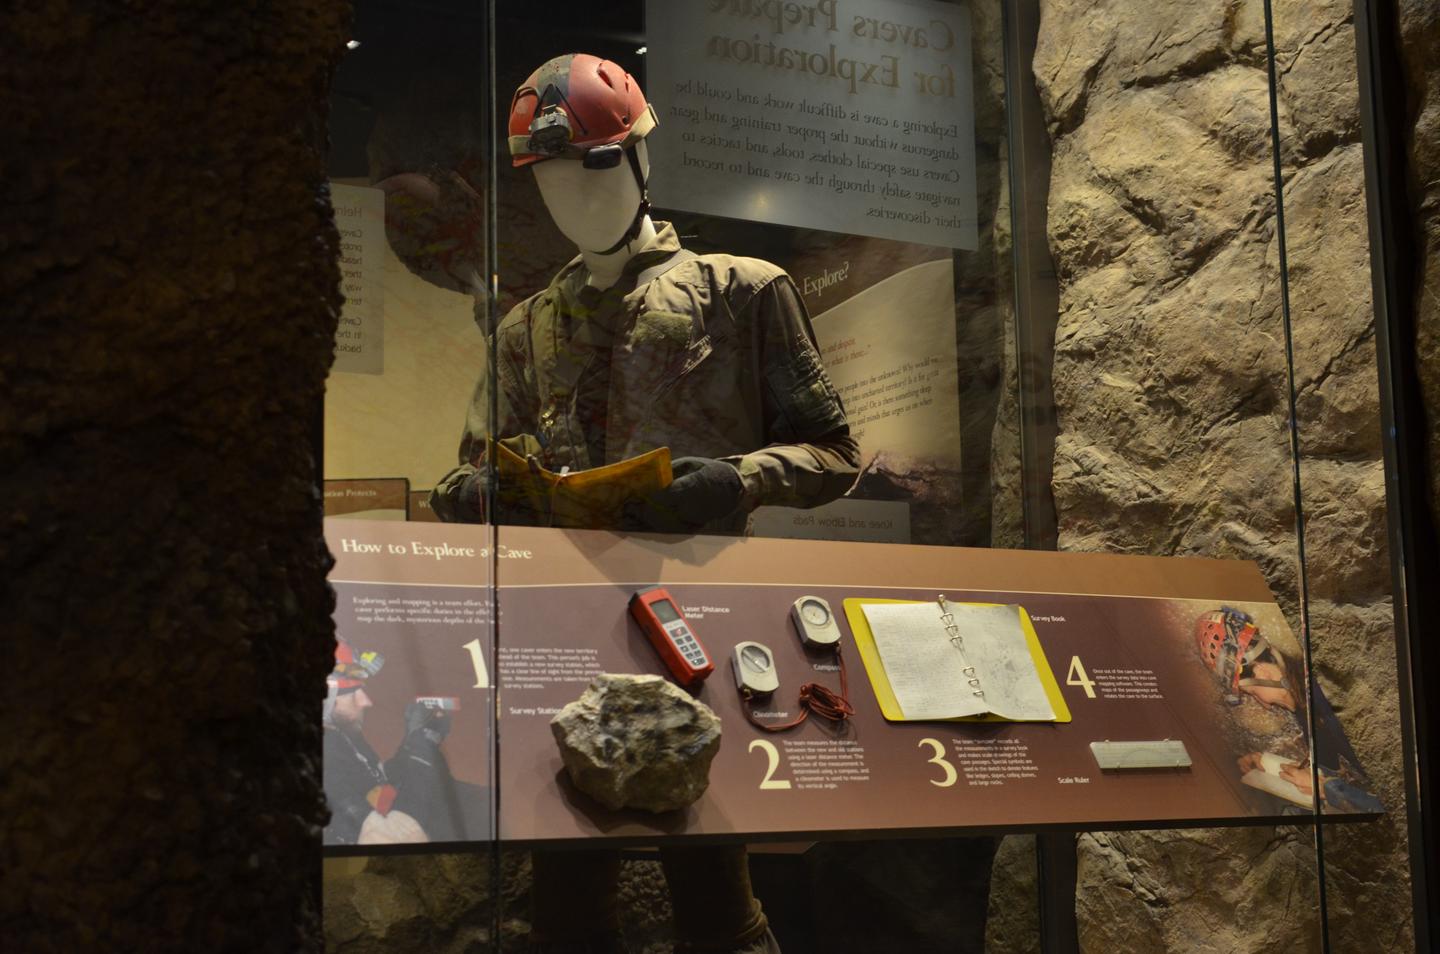 A mannequin dressed in caving gear is posed in a display that explains the itemsLearn about what it takes to be a cave explorer!